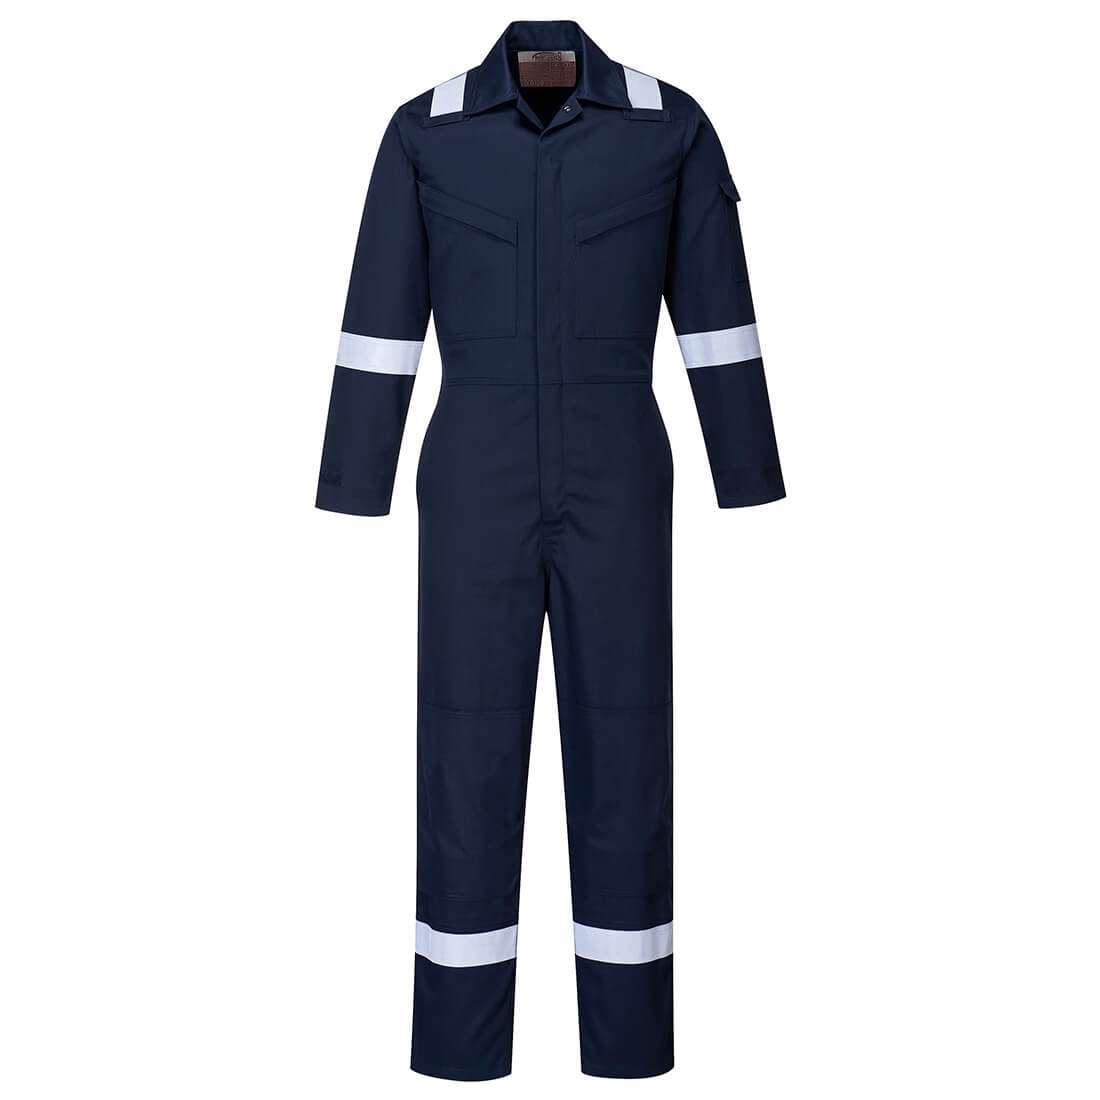 Bizflame Plus Ladies Coverall 350g - Safetywear